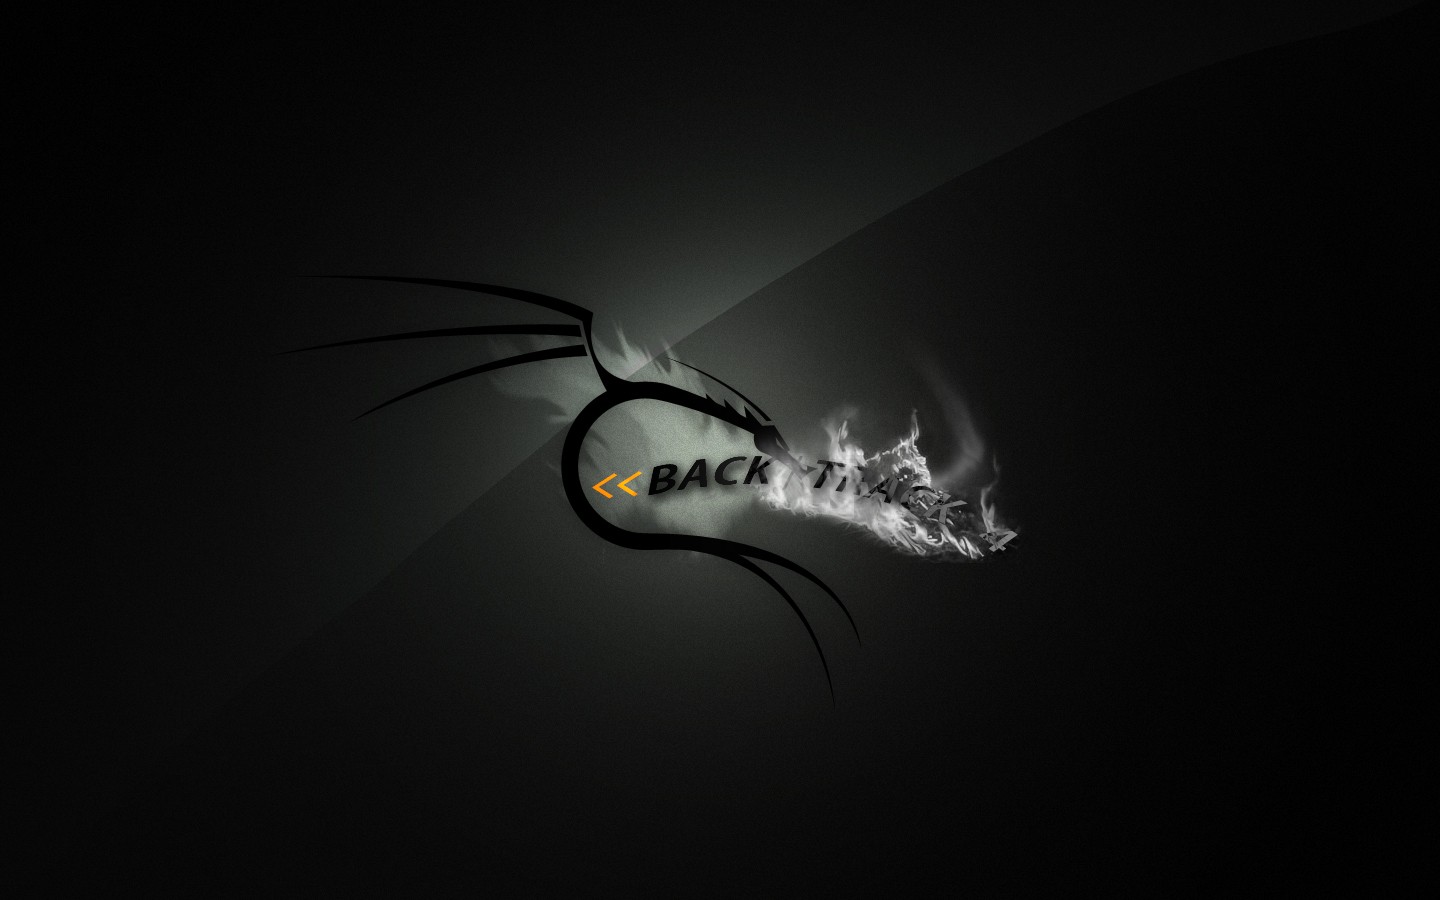 backtrack linux best widescreen background awesome HD Wallpaper of